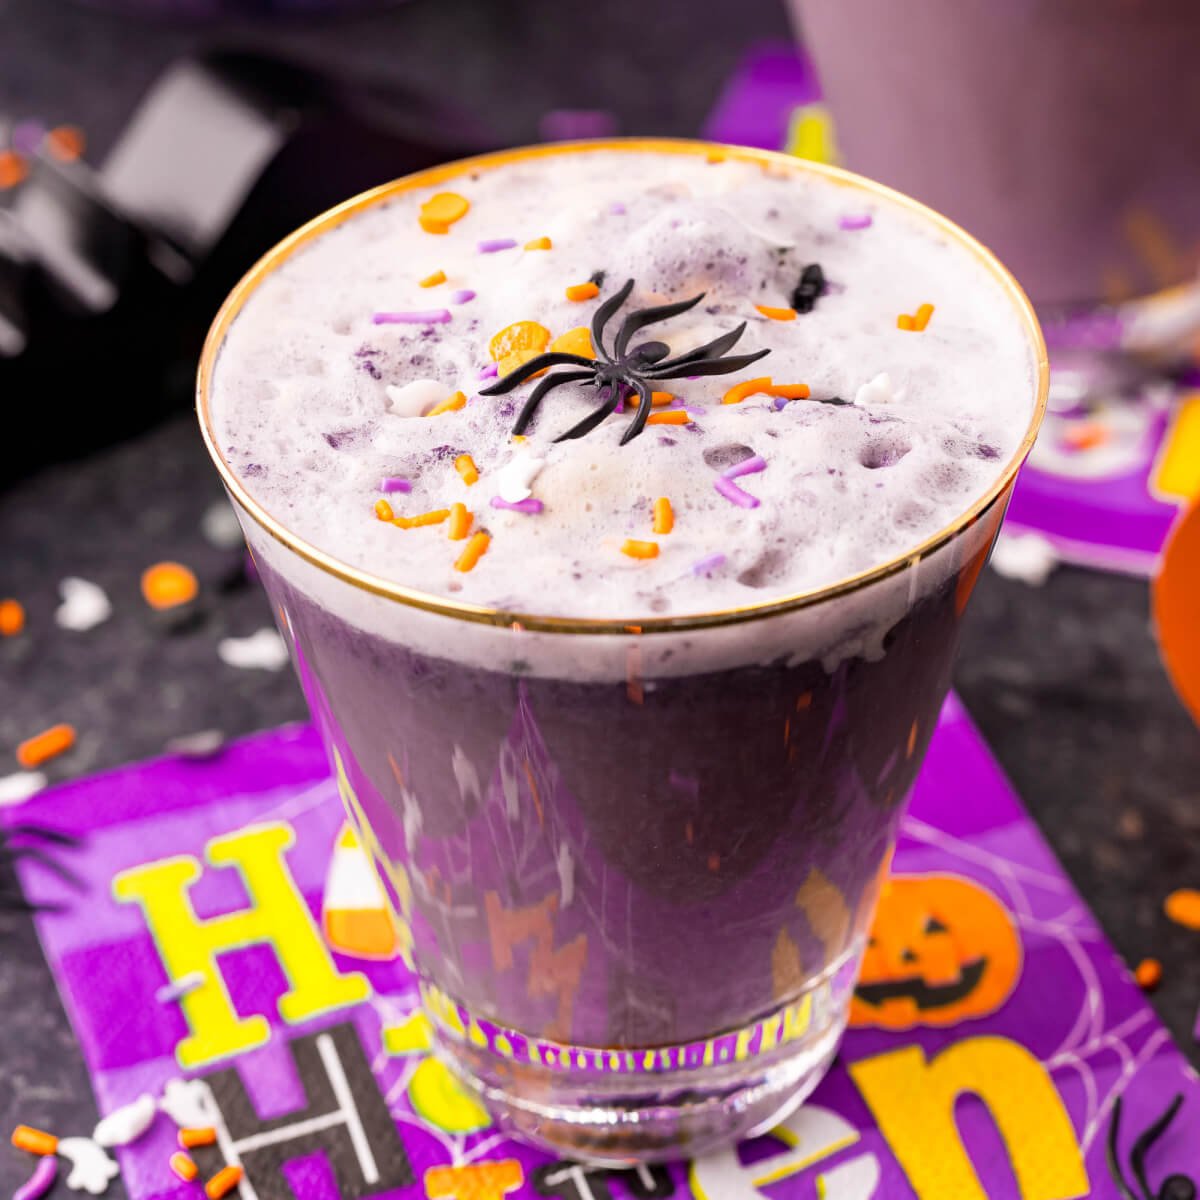 https://www.lovebakesgoodcakes.com/wp-content/uploads/2021/10/witchs-brew-halloween-punch-square.jpg